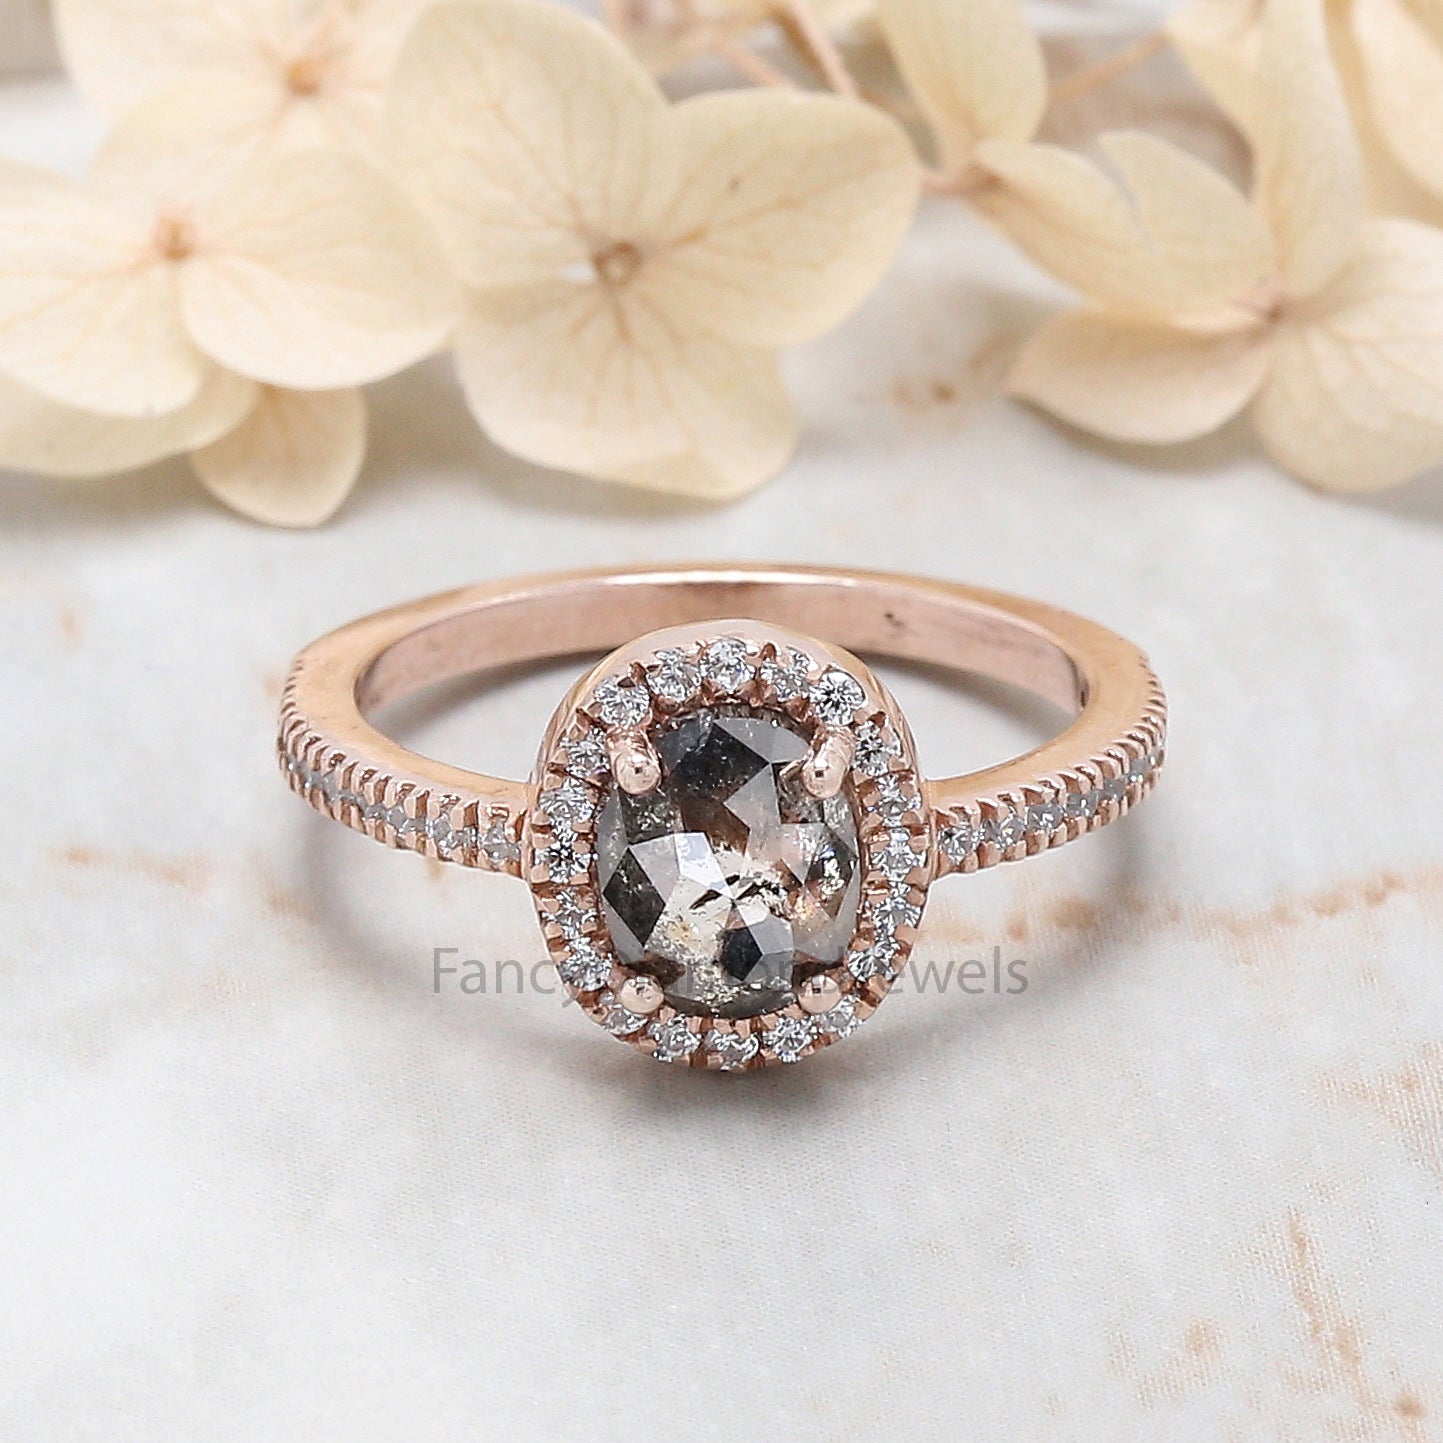 Oval Cut Salt And Pepper Diamond Ring 1.21 Ct 7.20 MM Oval Diamond Ring 14K Solid Rose Gold Silver Oval Engagement Ring Gift For Her QL1259